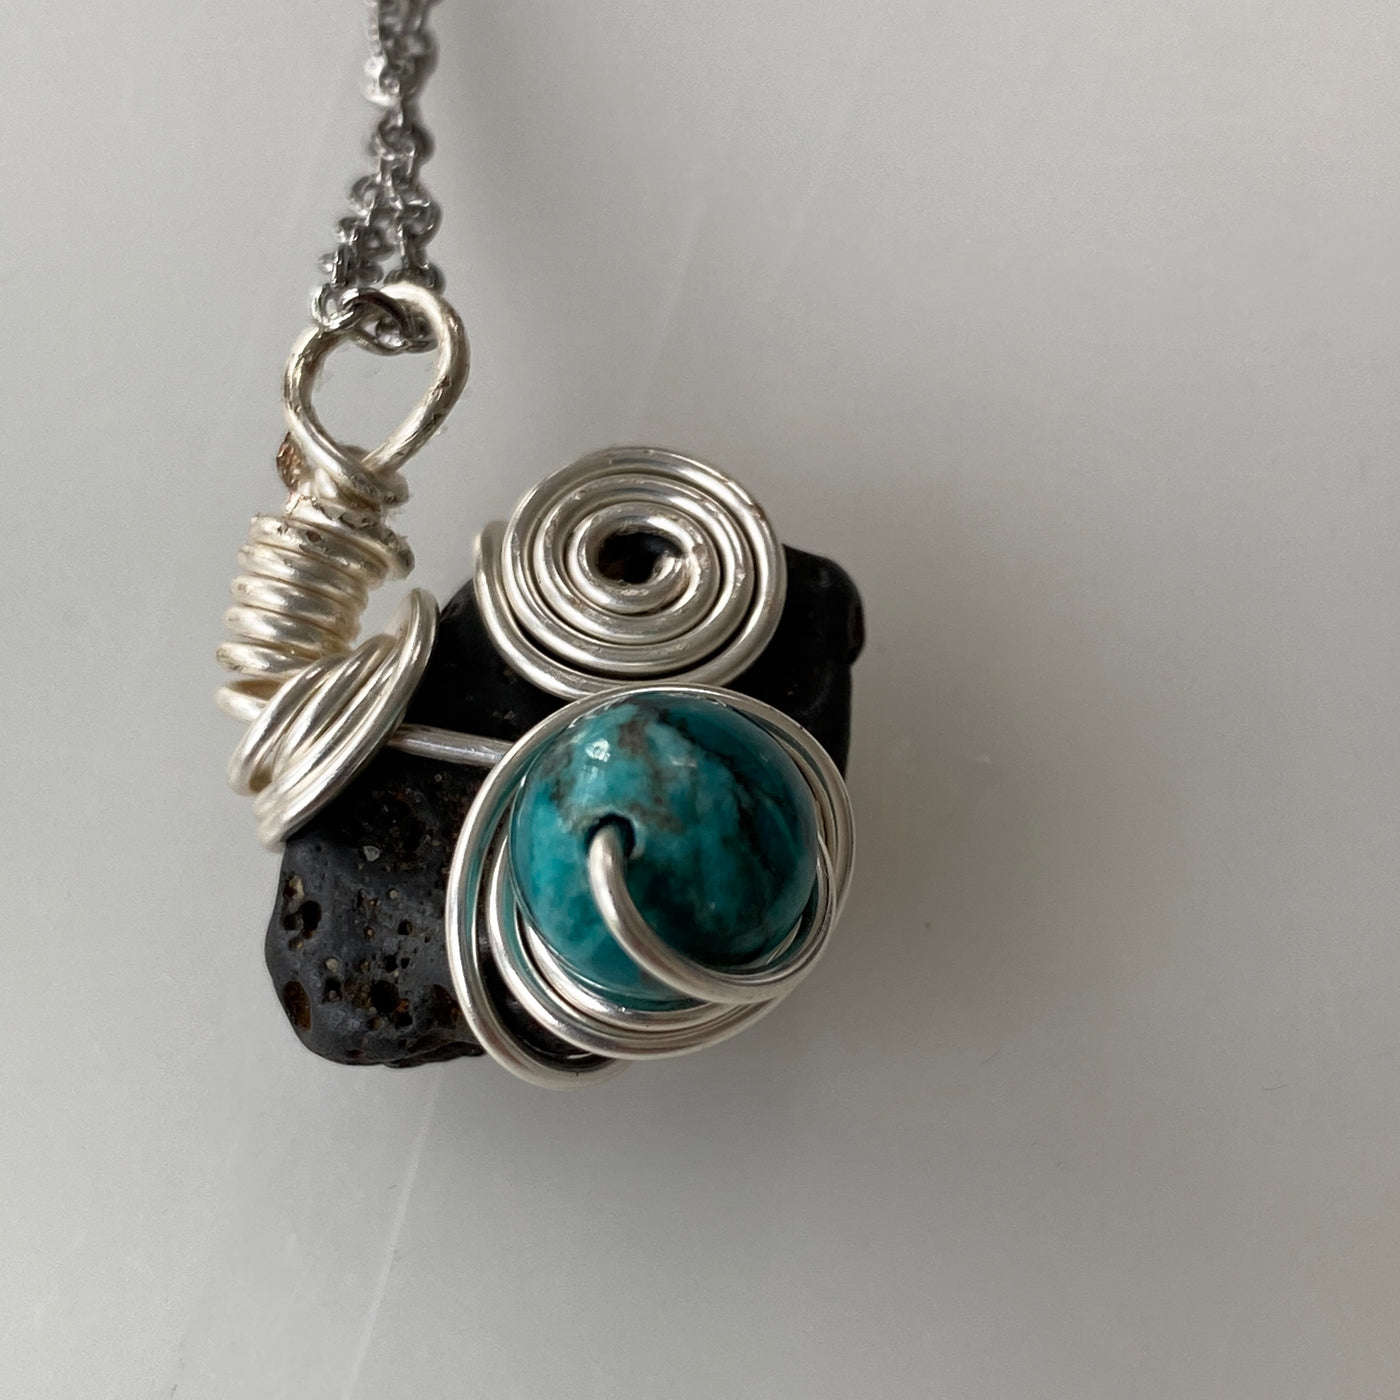 Small pendant featuring a grey natural stone, turquoise and silver wire. Elbastones collection.